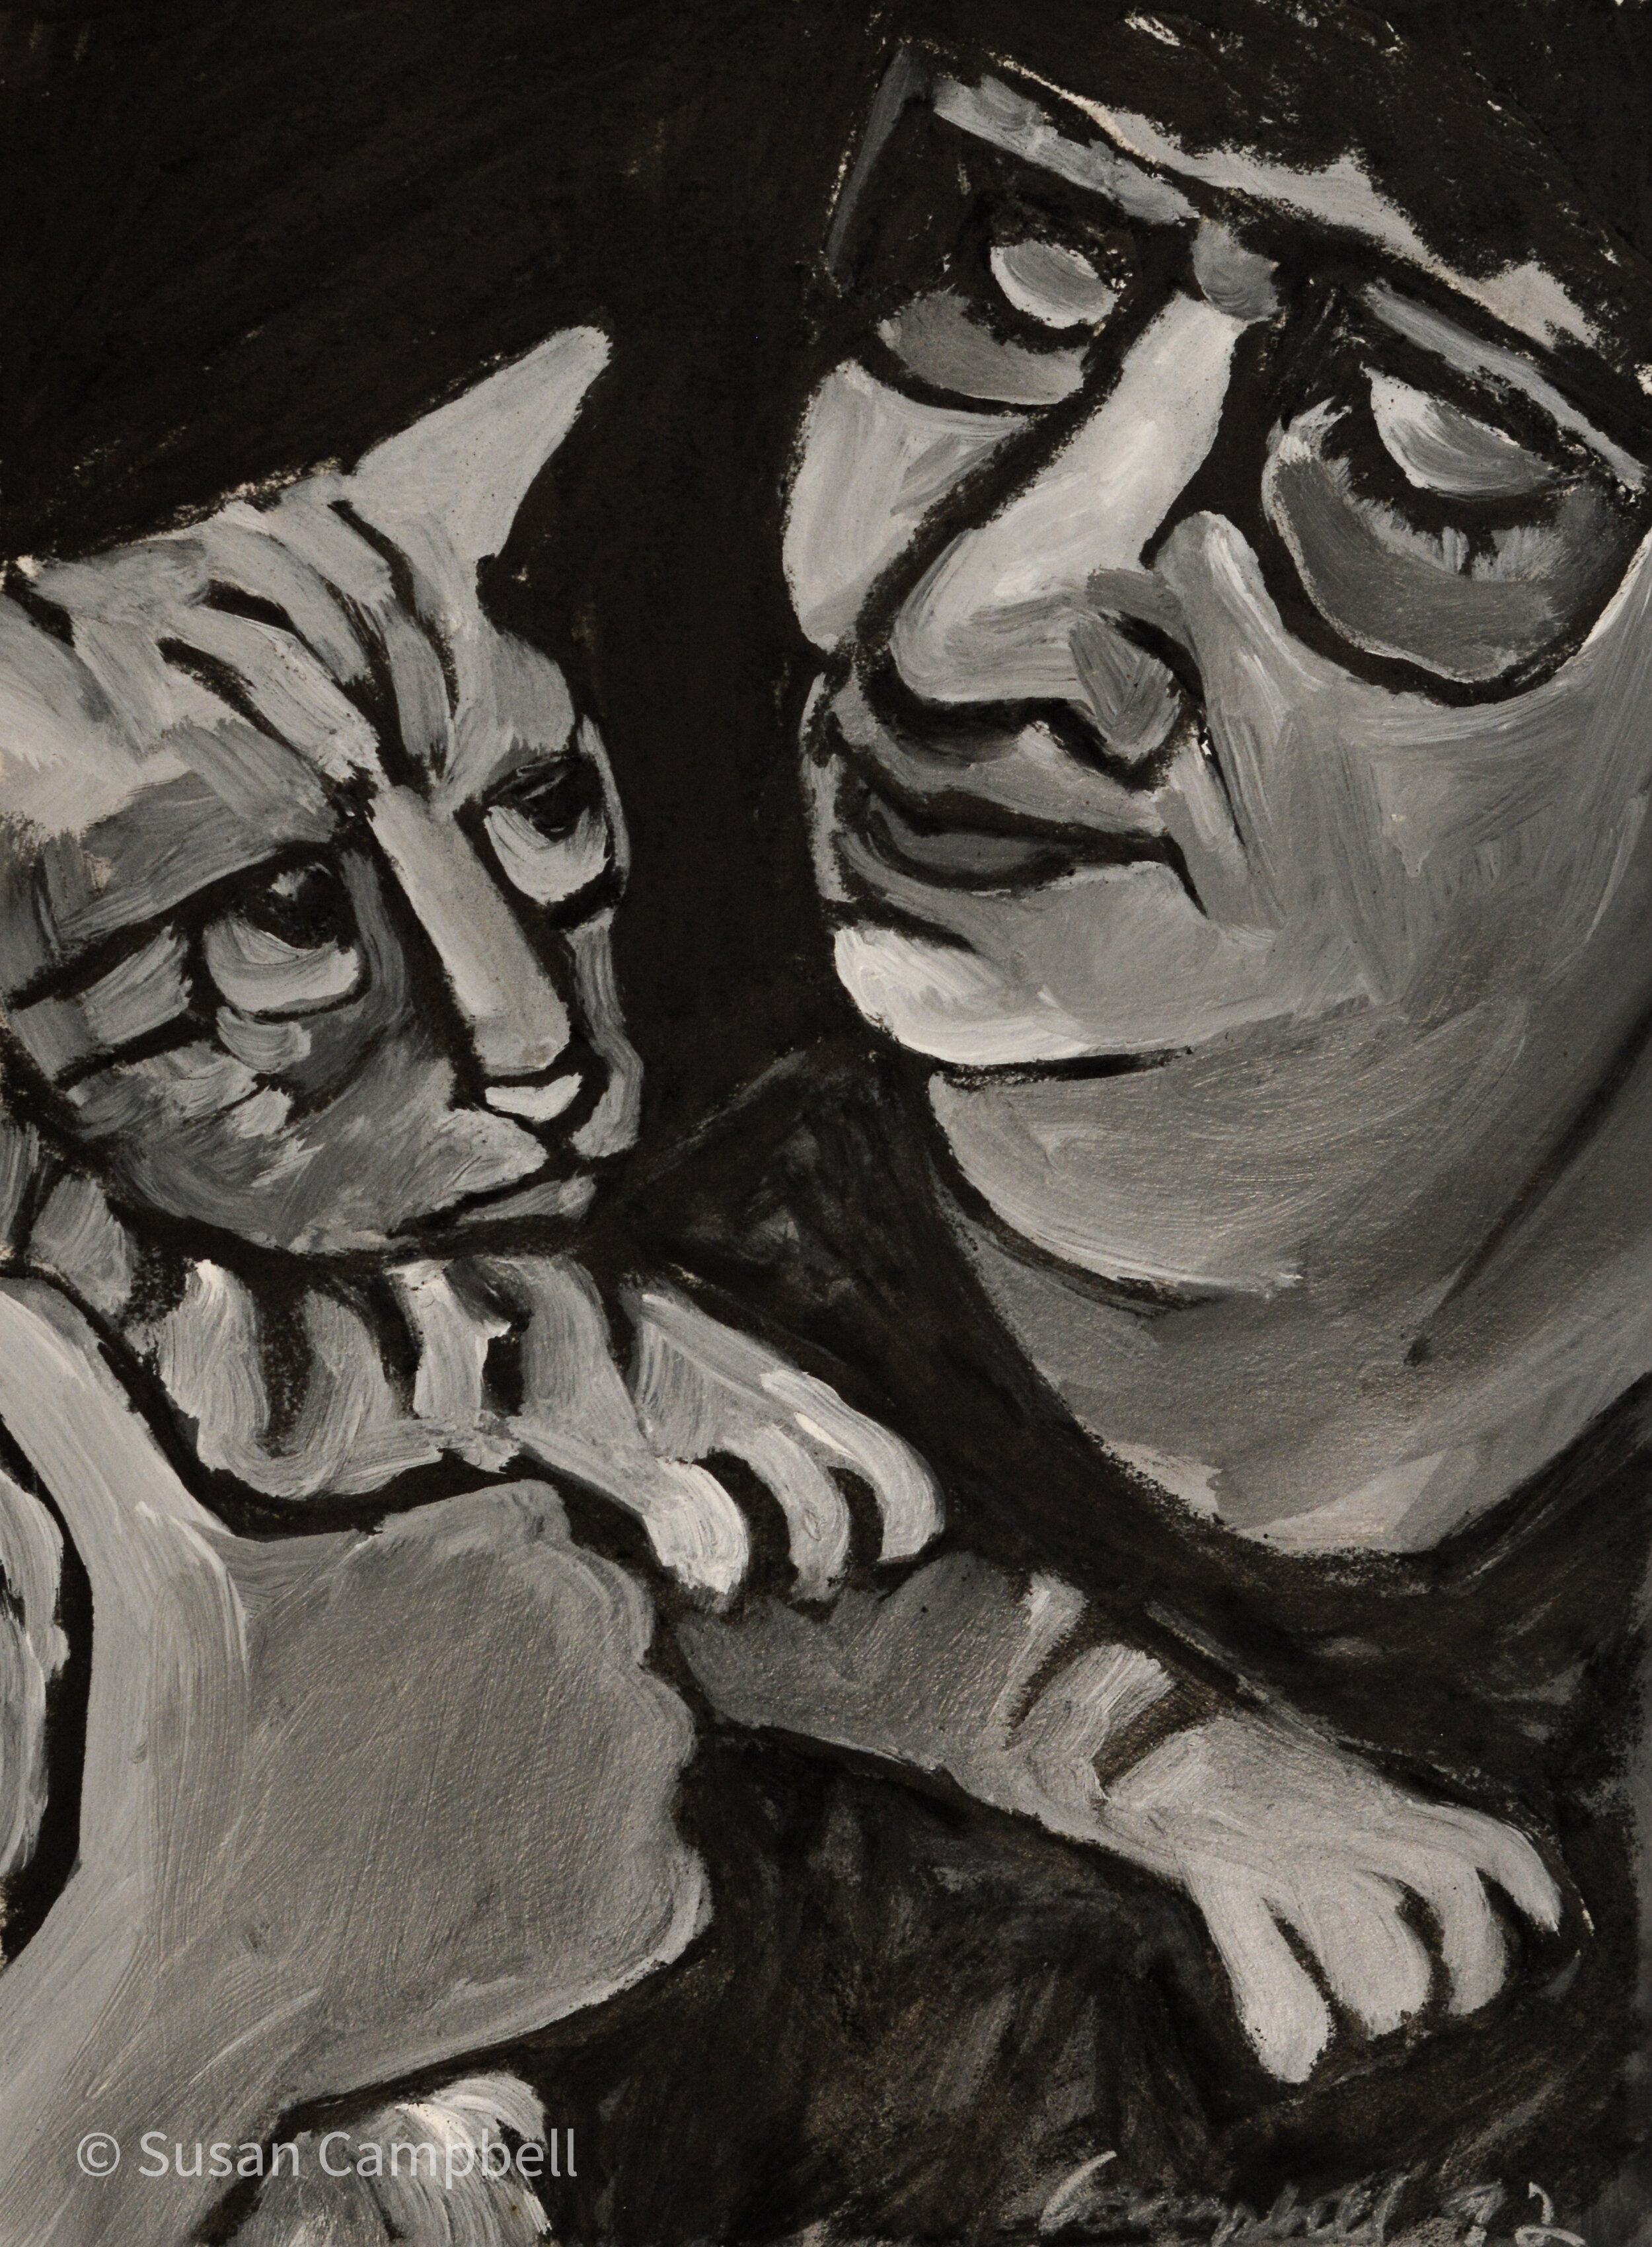 LADY FACE, GLASSES, CAT, LOOKING AT EACH OTHER